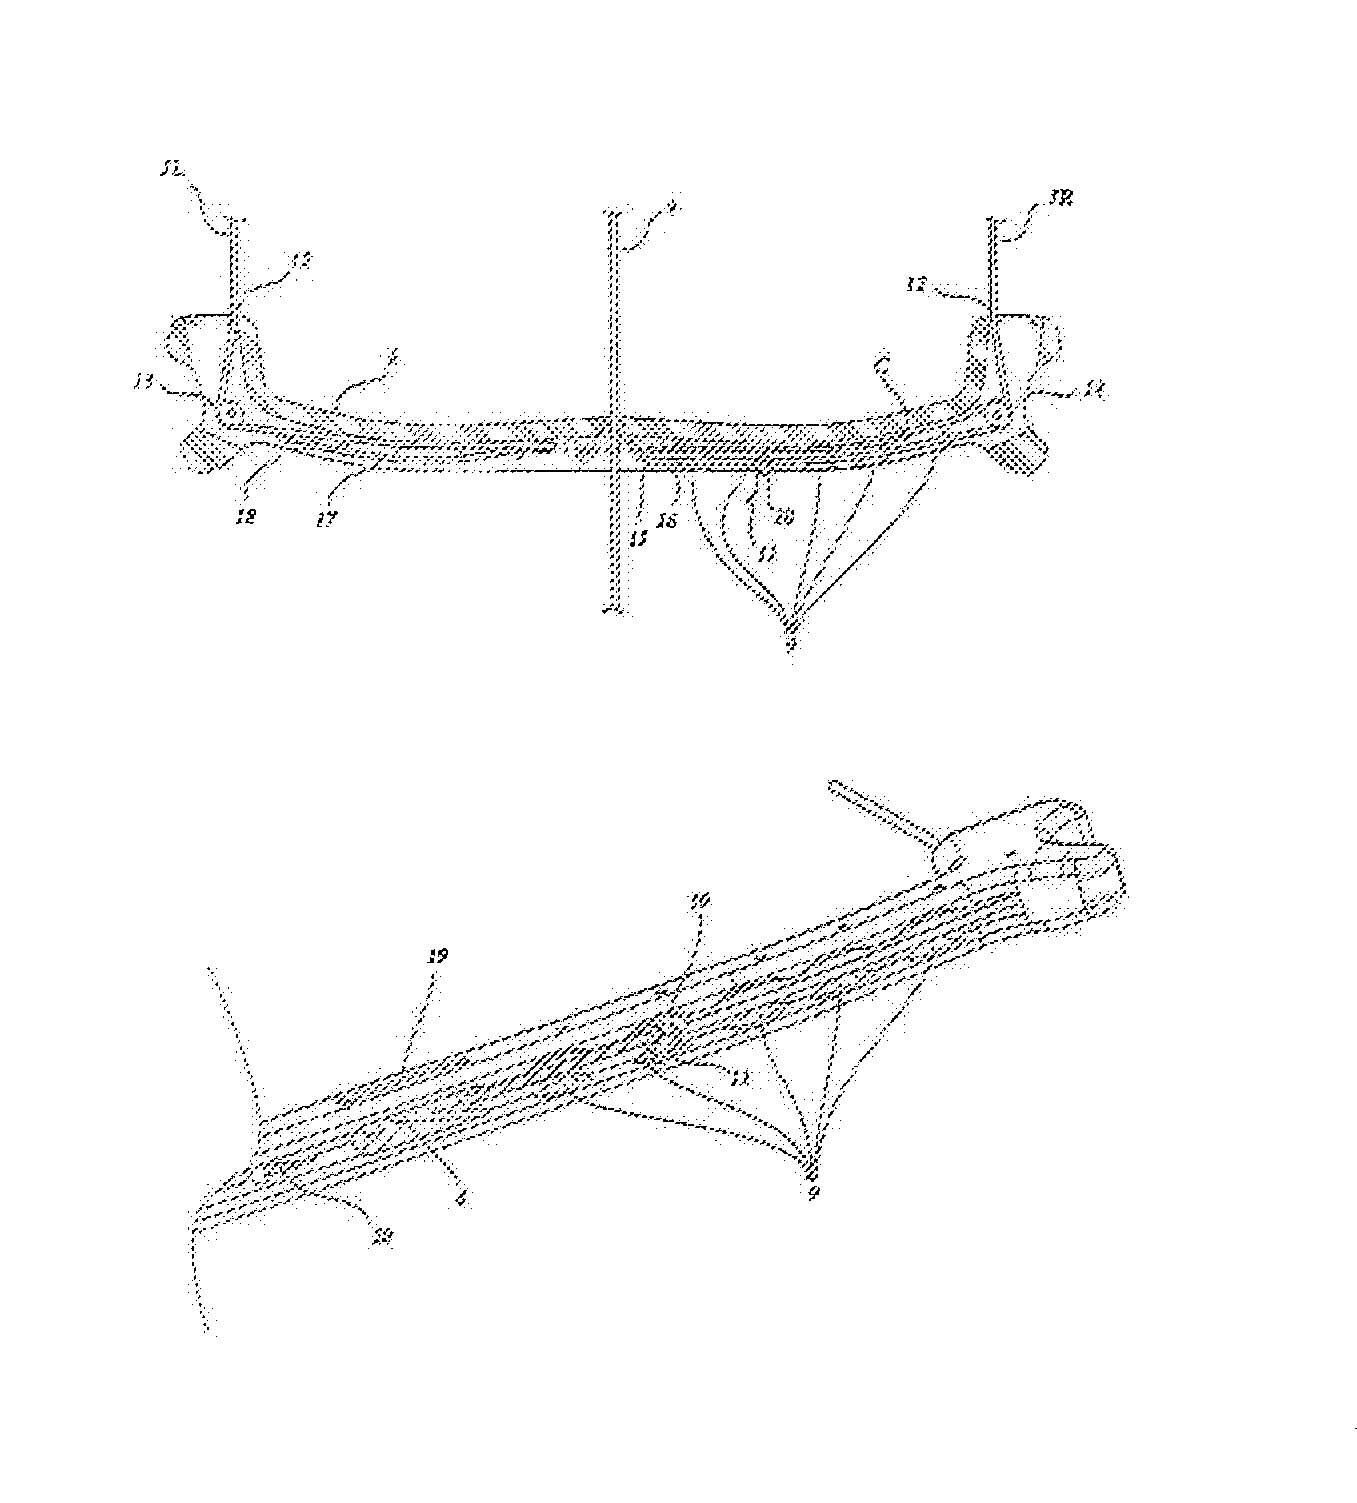 Kite control bar with integrated line adjustment means